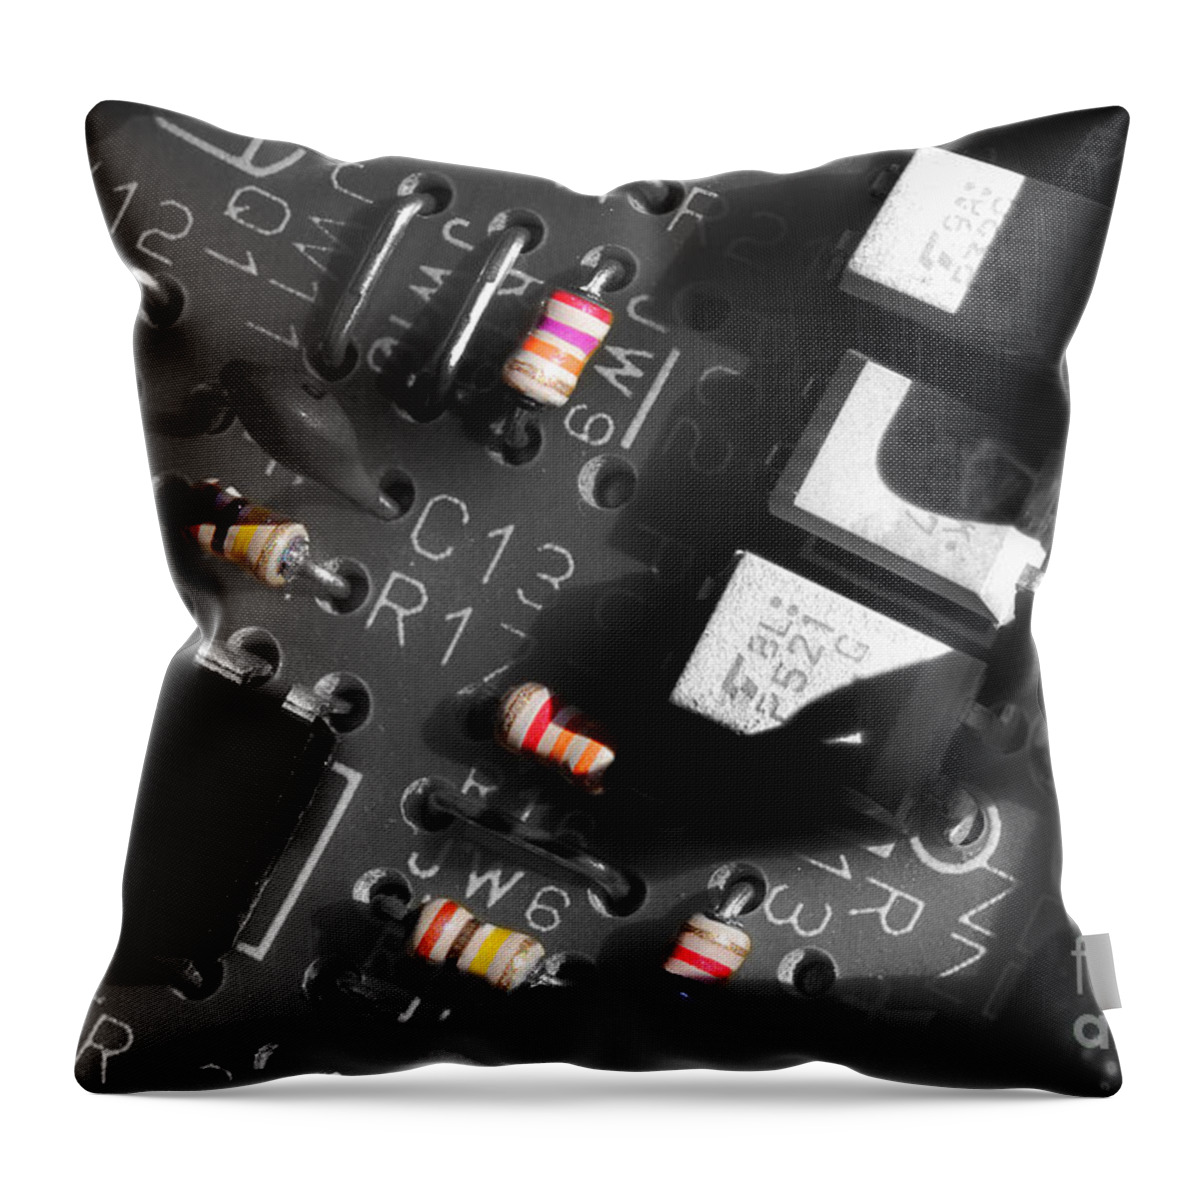 Electronics Throw Pillow featuring the photograph Electronics 2 by Michael Eingle